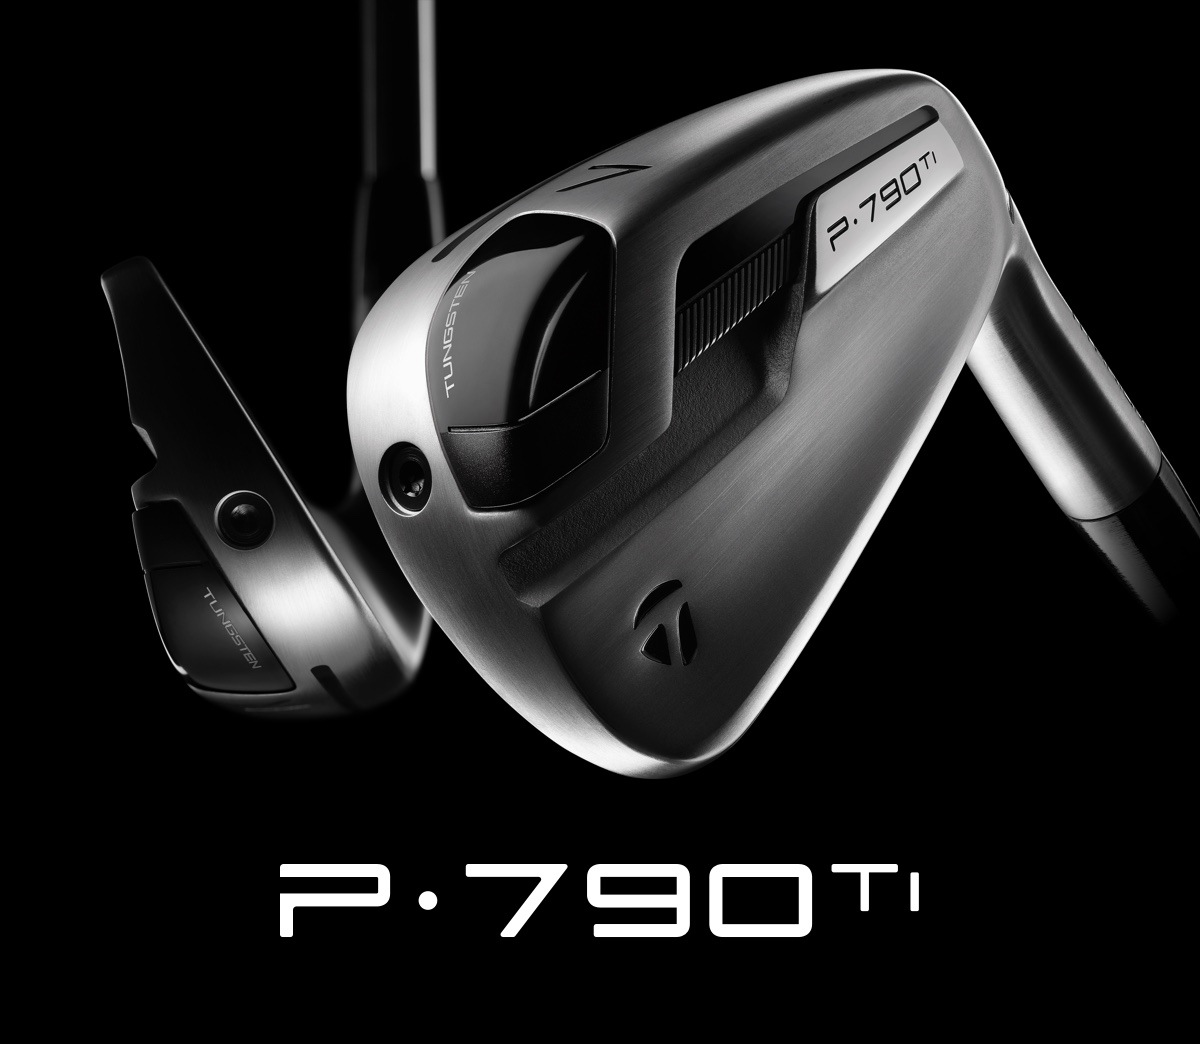 Learn more about the new P790 TI